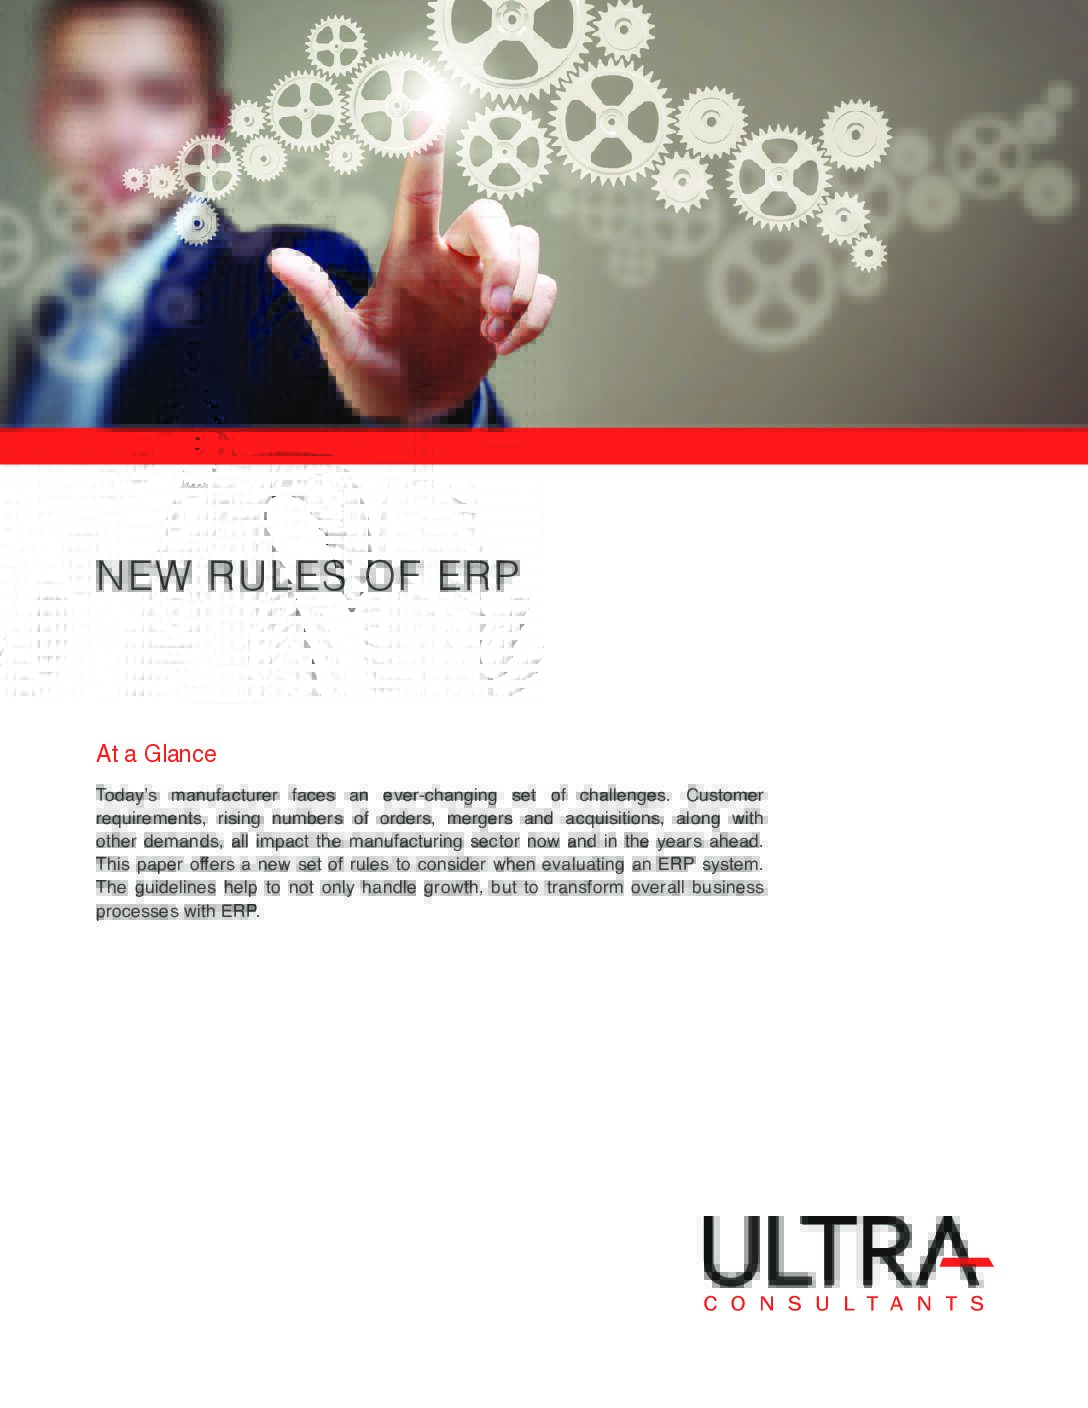 ERP consultants and what they do